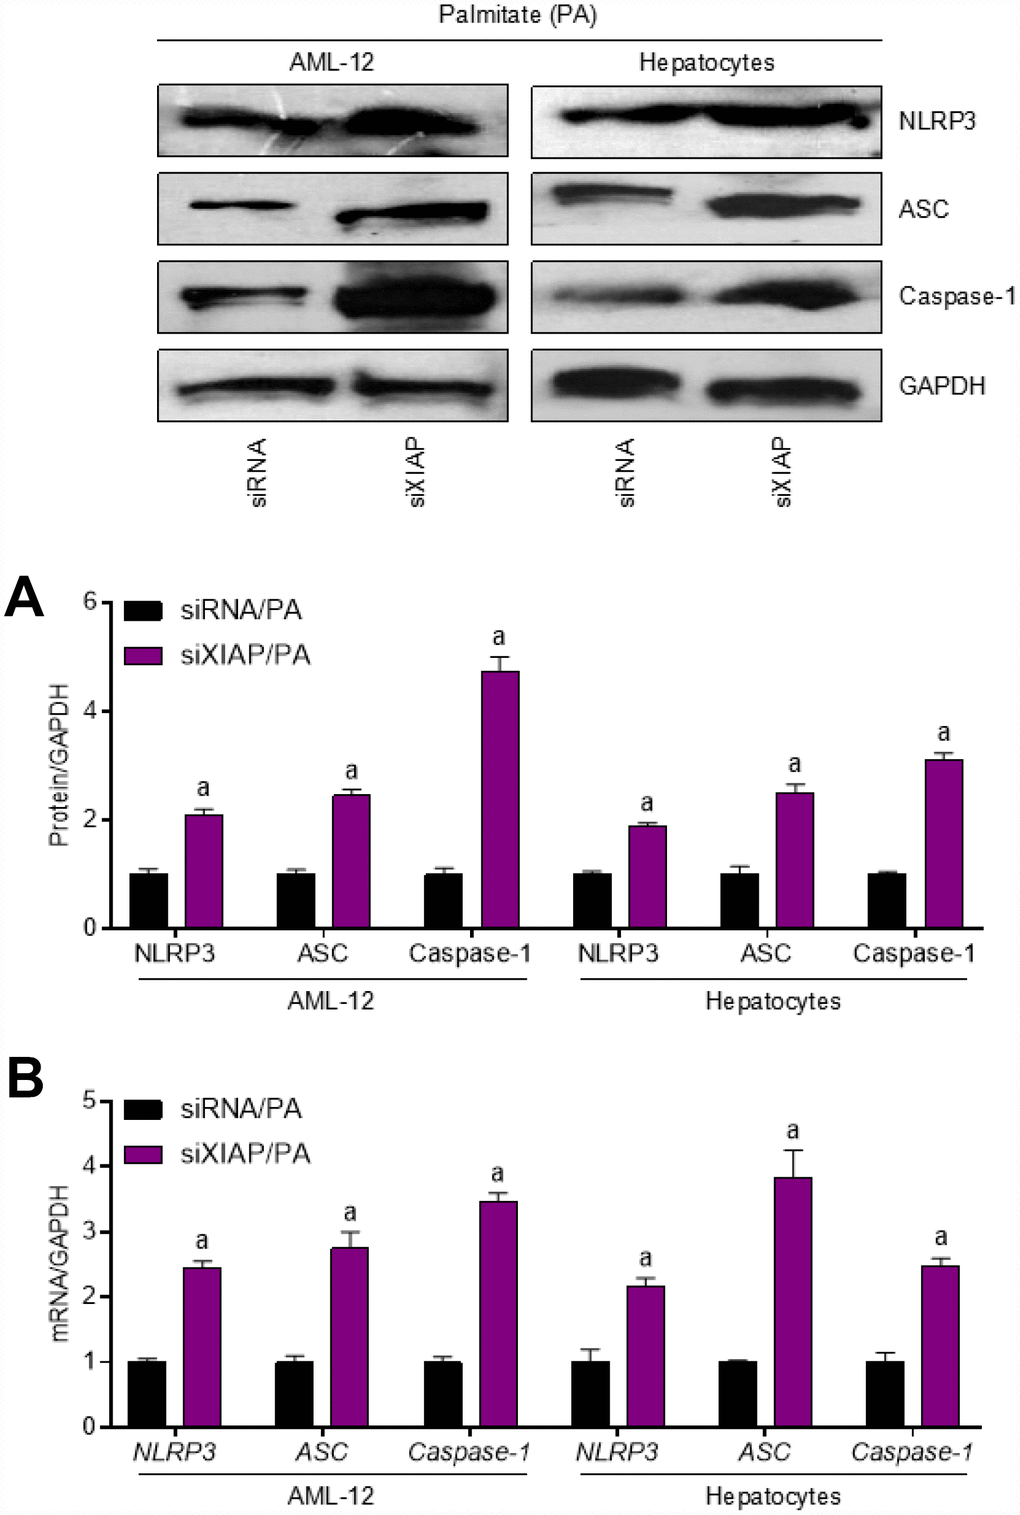 Inhibition of XIAP positively regulates PA-triggered inflammation in vitro. AML-12 and primary hepatocytes were transfected with XIAP siRNA for 24 h, followed by PA (250 μM) treatment for another 24 h. Then, further studies as exhibited were performed. (A and B) Representative western blot and qPCR detection showed the changes in mRNA and protein levels of NLRP3 inflammasome (NLRP3, ASC and Caspase-1) in PA-induced cells. For all bar plots shown, data are expressed as the mean ± SEM. n = 8 per group. ap 